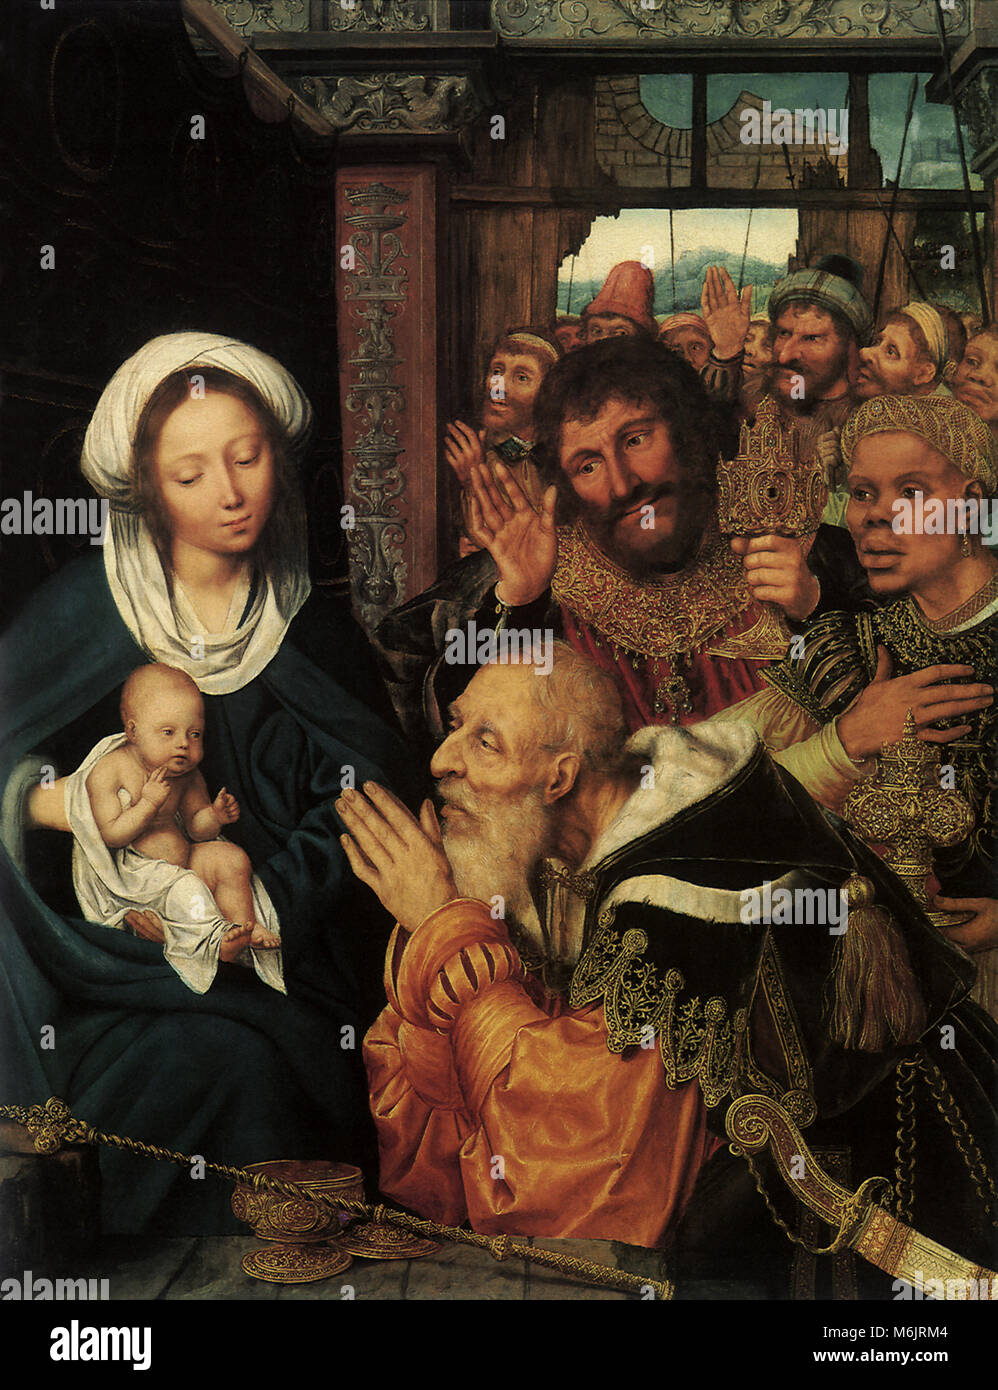 The Adoration of the Magi, Massys, Quentin, 1526. Stock Photo